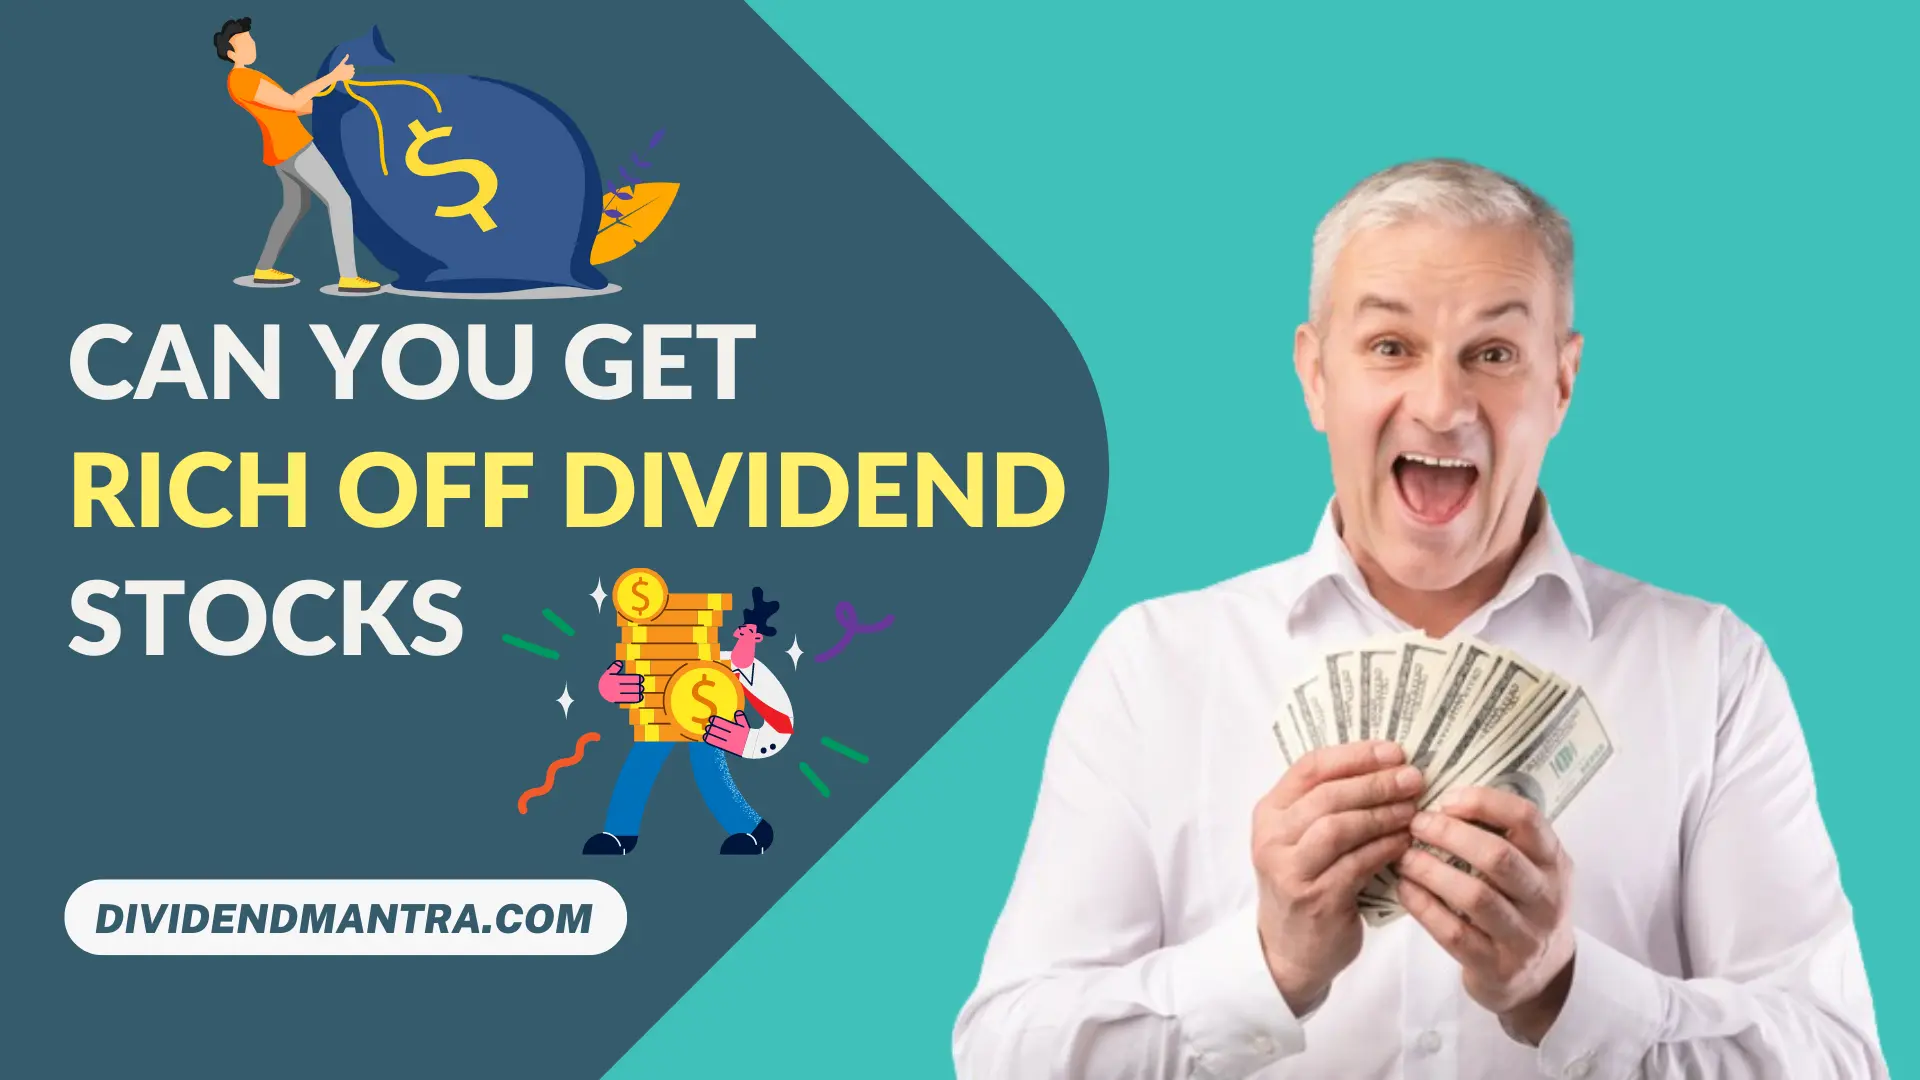 Can You Get Rich off Dividend Stocks?